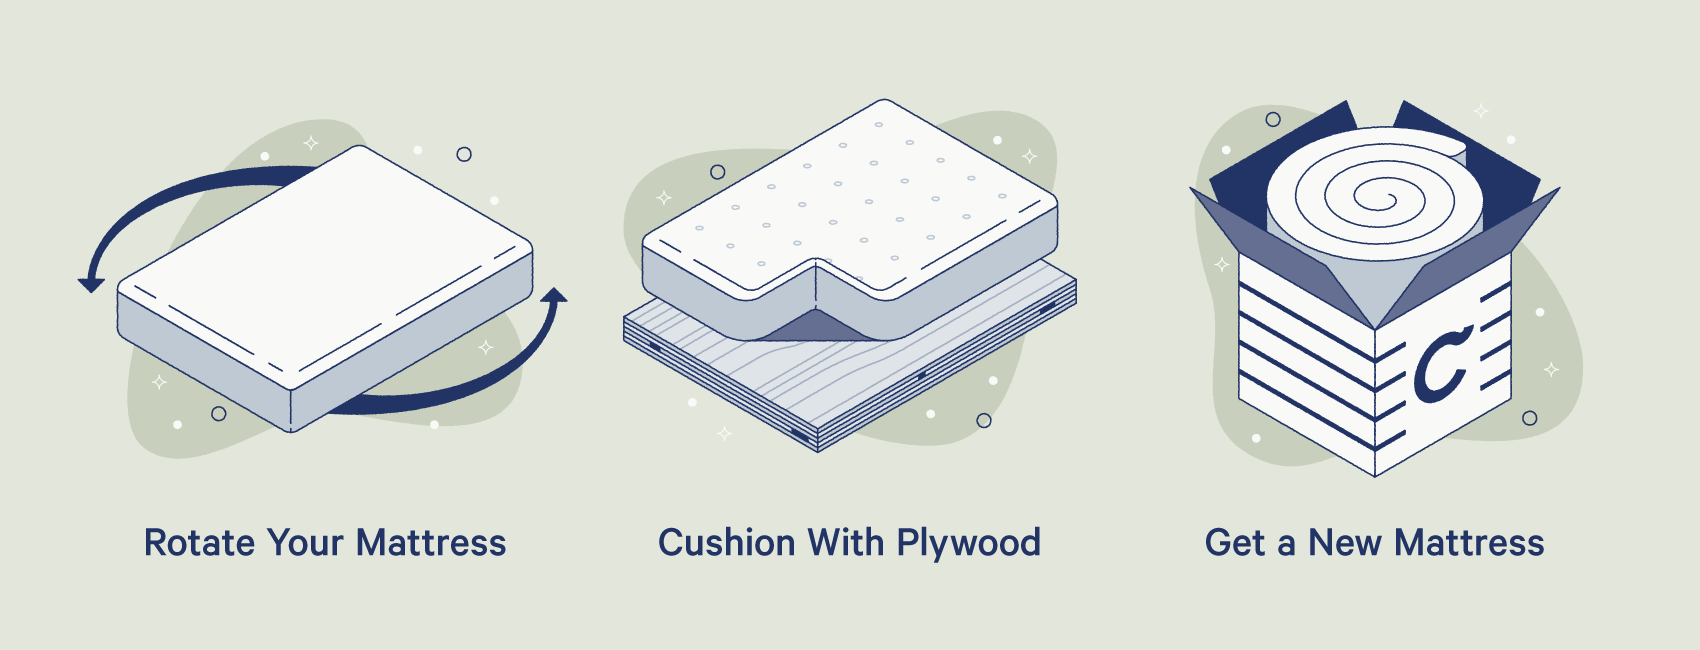 How to fix squeaky mattress